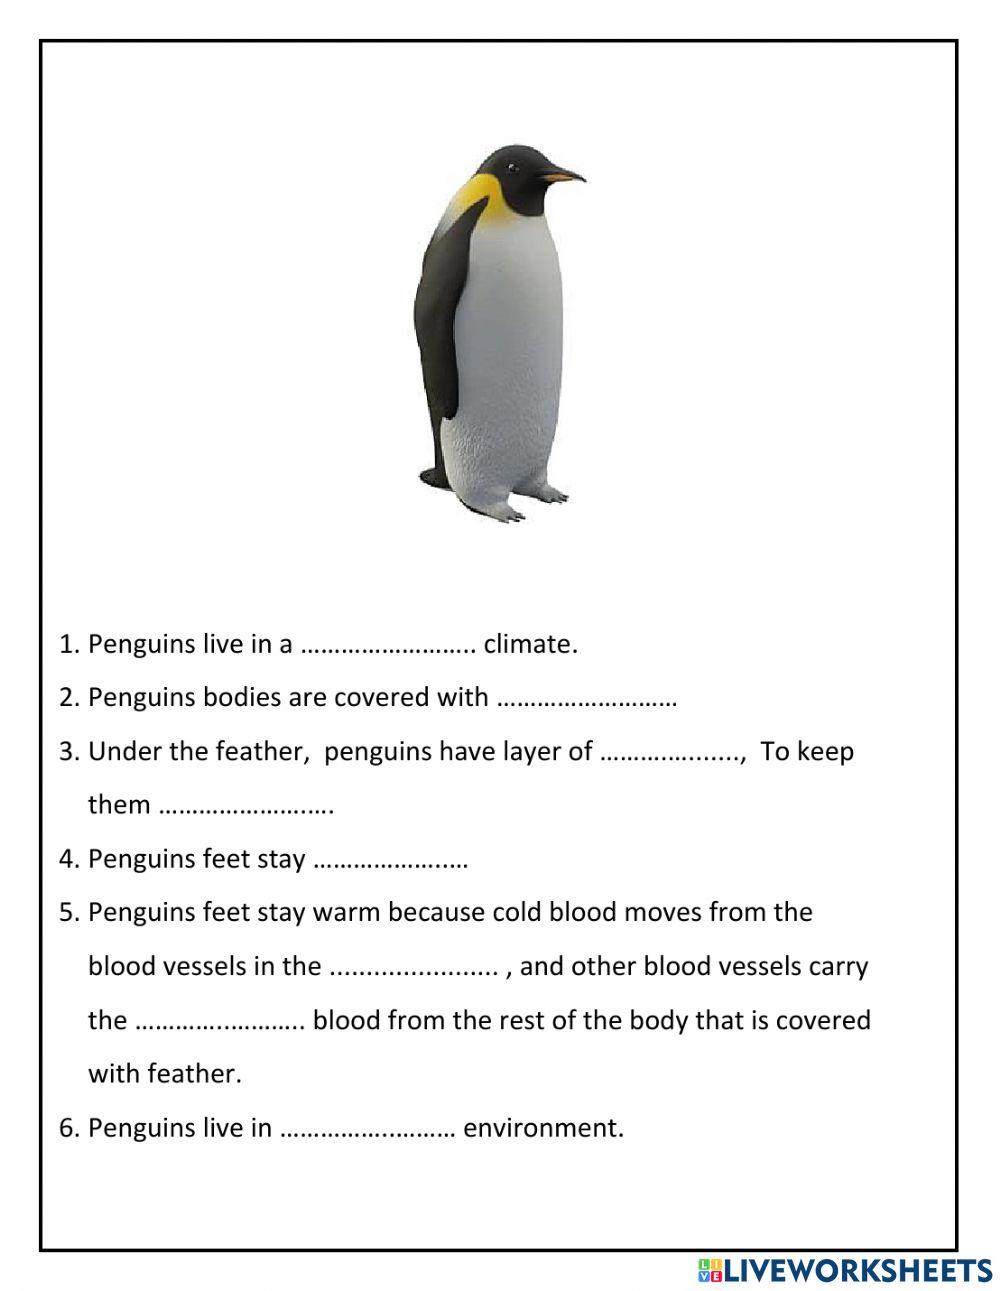 Adaptation in penguins and lizards